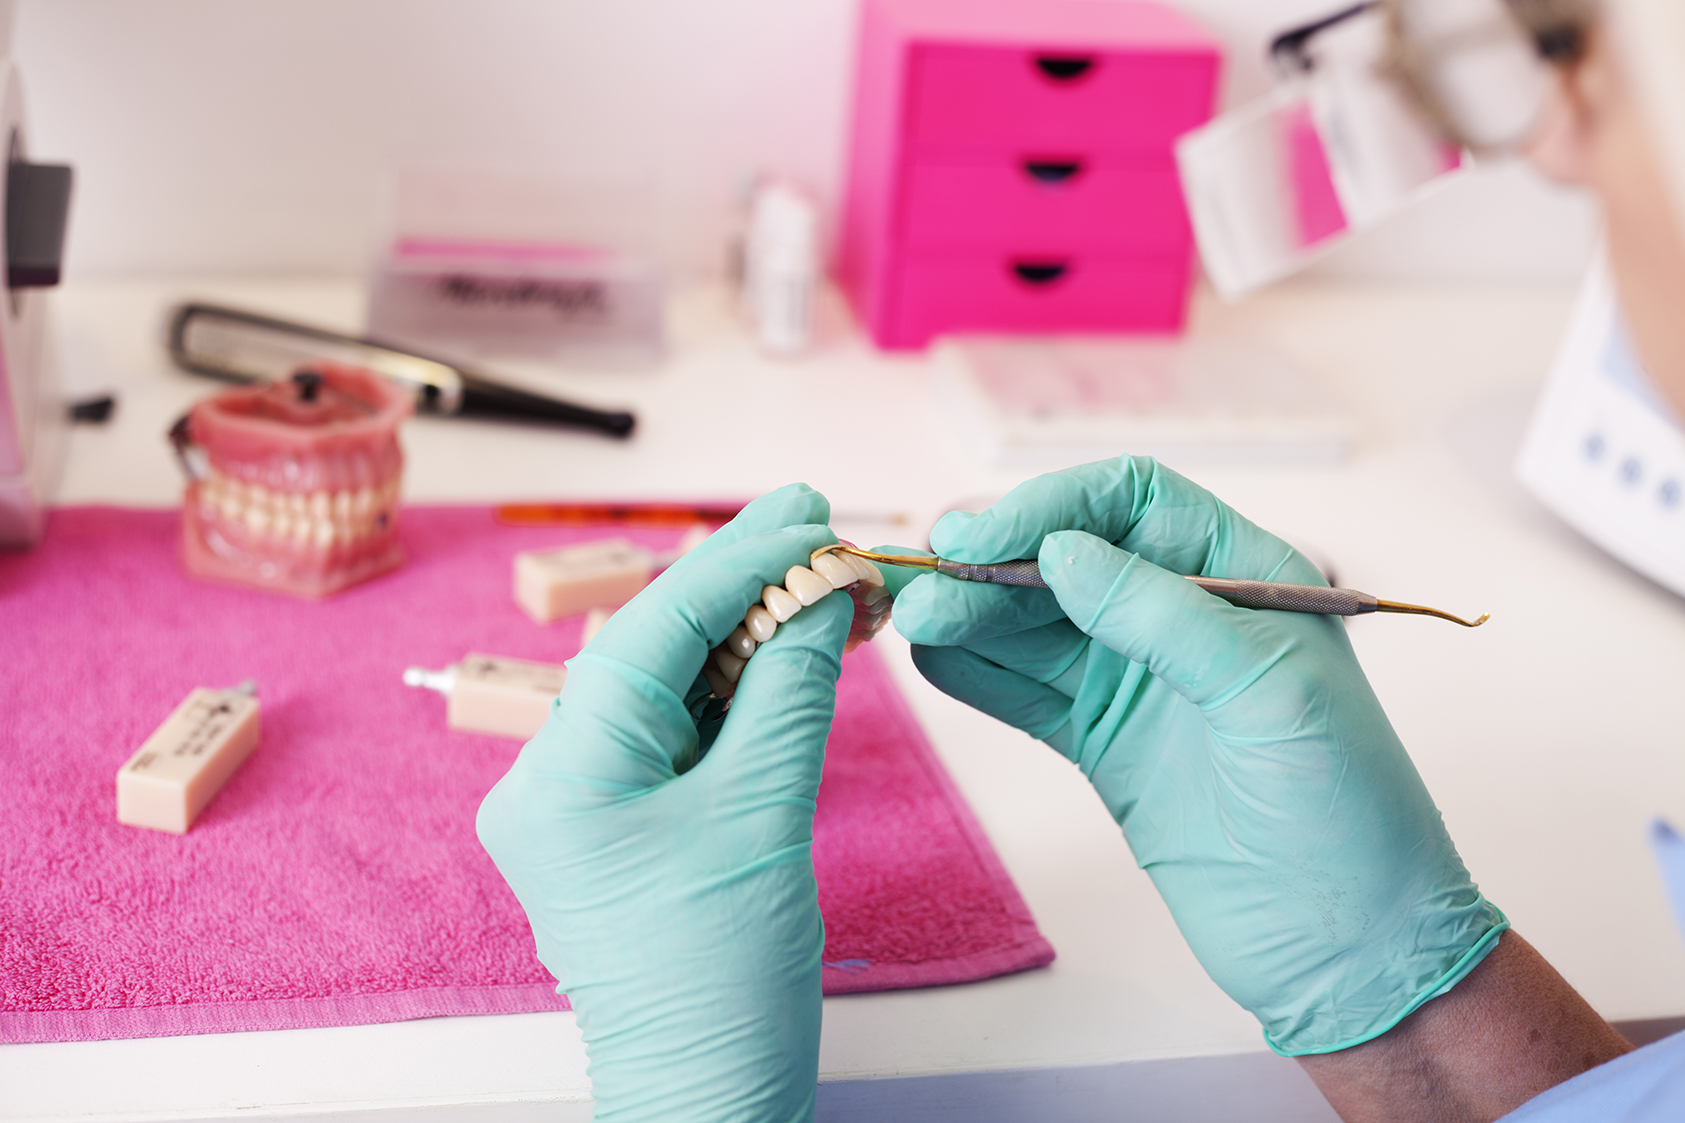 Dental technician working on a tooth crown